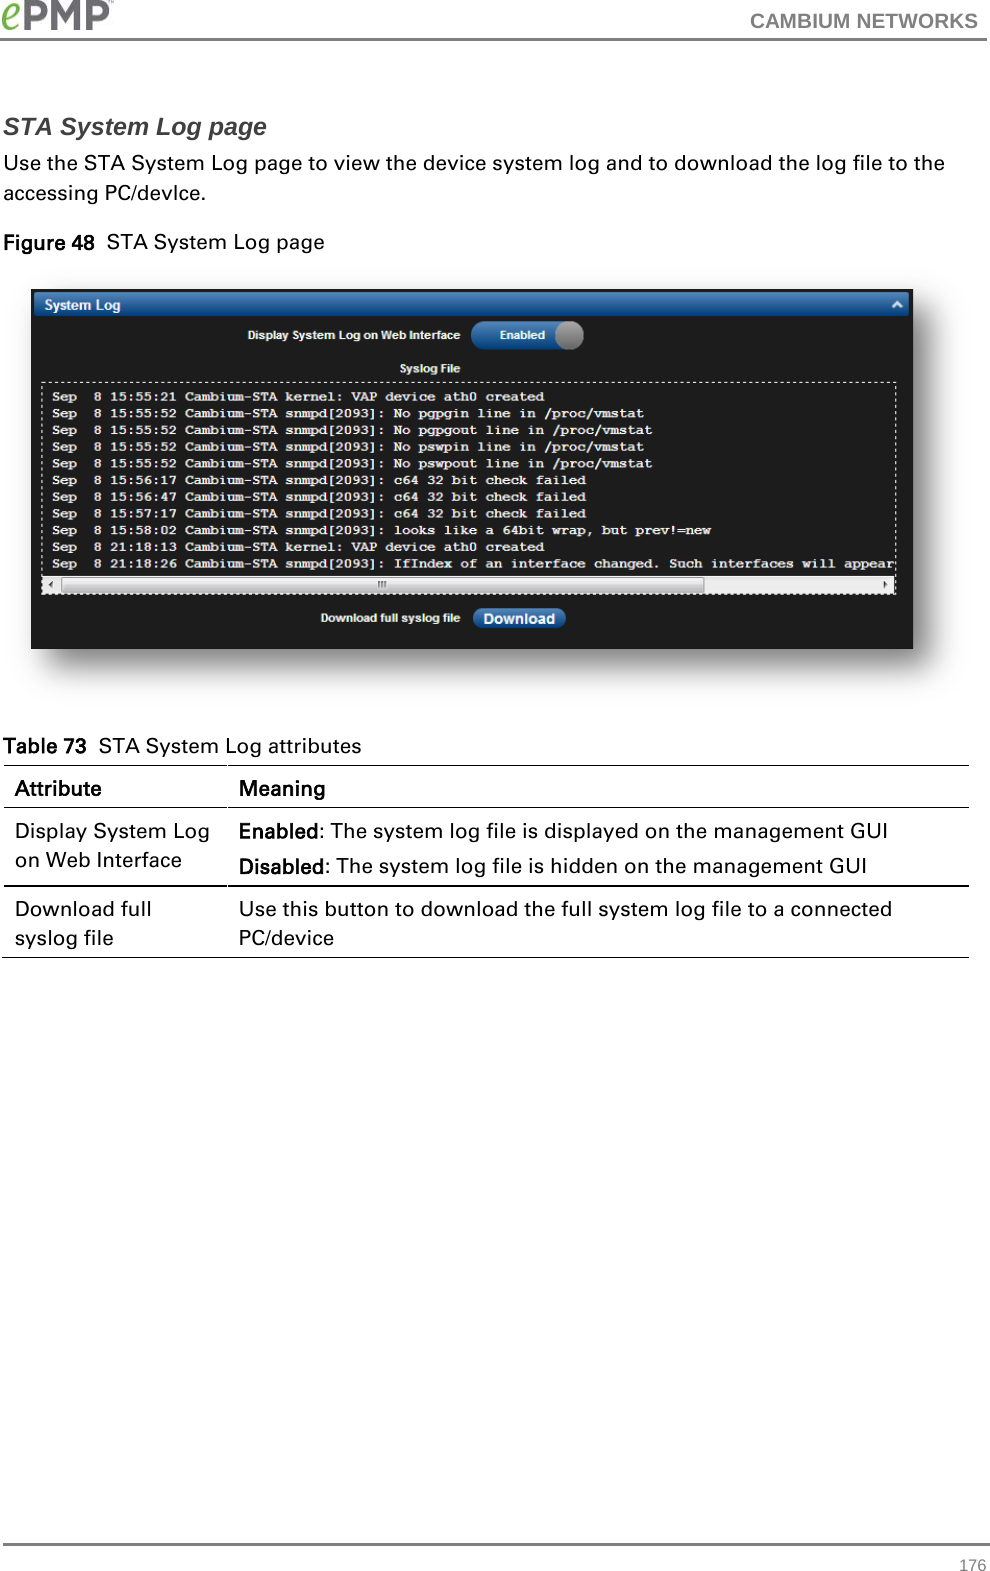 CAMBIUM NETWORKS  STA System Log page Use the STA System Log page to view the device system log and to download the log file to the accessing PC/devlce. Figure 48  STA System Log page  Table 73  STA System Log attributes Attribute Meaning Display System Log on Web Interface Enabled: The system log file is displayed on the management GUI Disabled: The system log file is hidden on the management GUI Download full syslog file Use this button to download the full system log file to a connected PC/device    176 